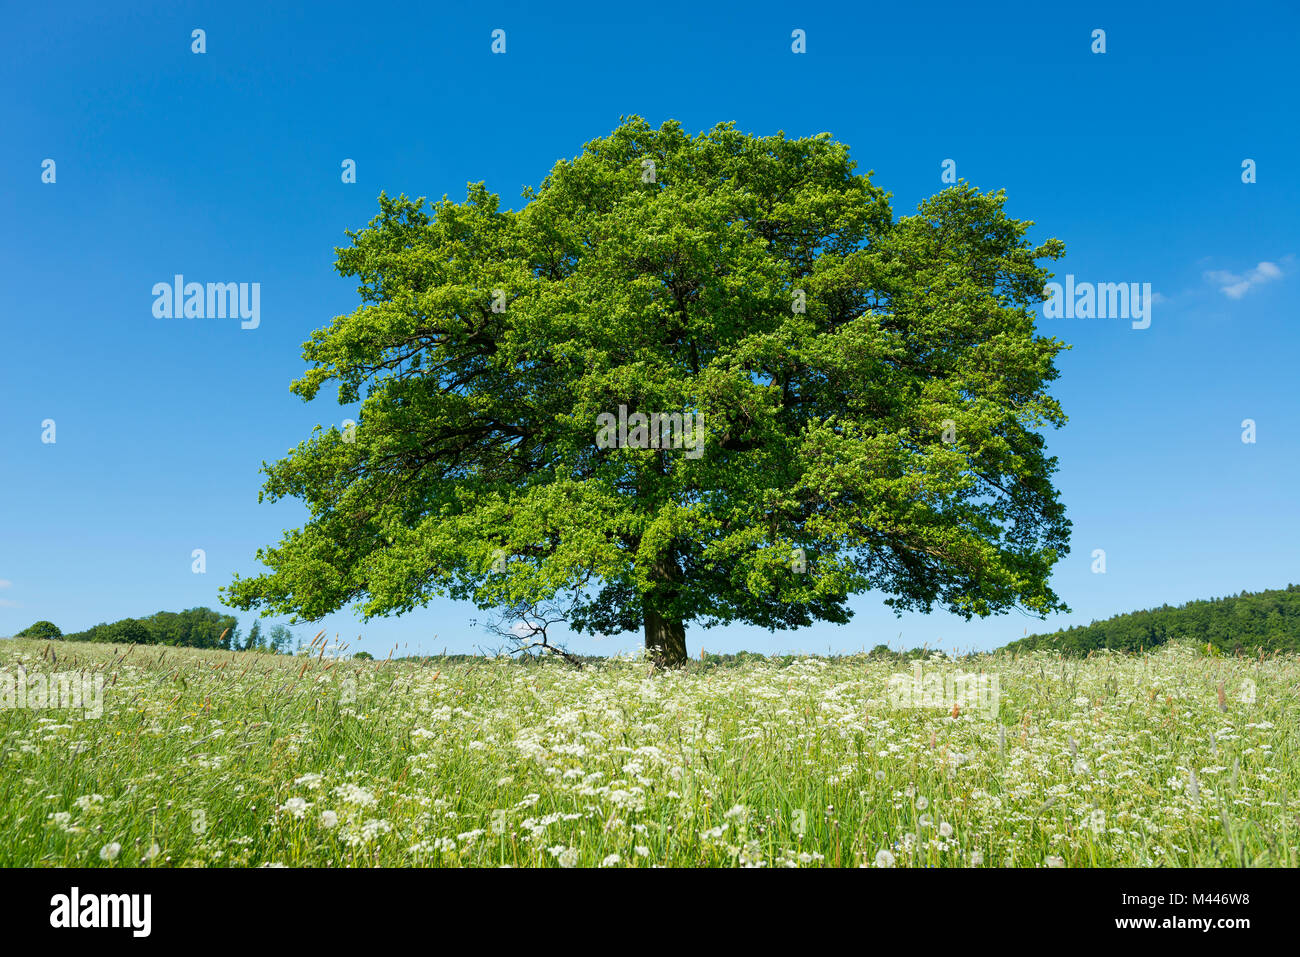 Old English oak (Quercus robur) in blooming meadow,solitary tree,Thuringia,Germany Stock Photo